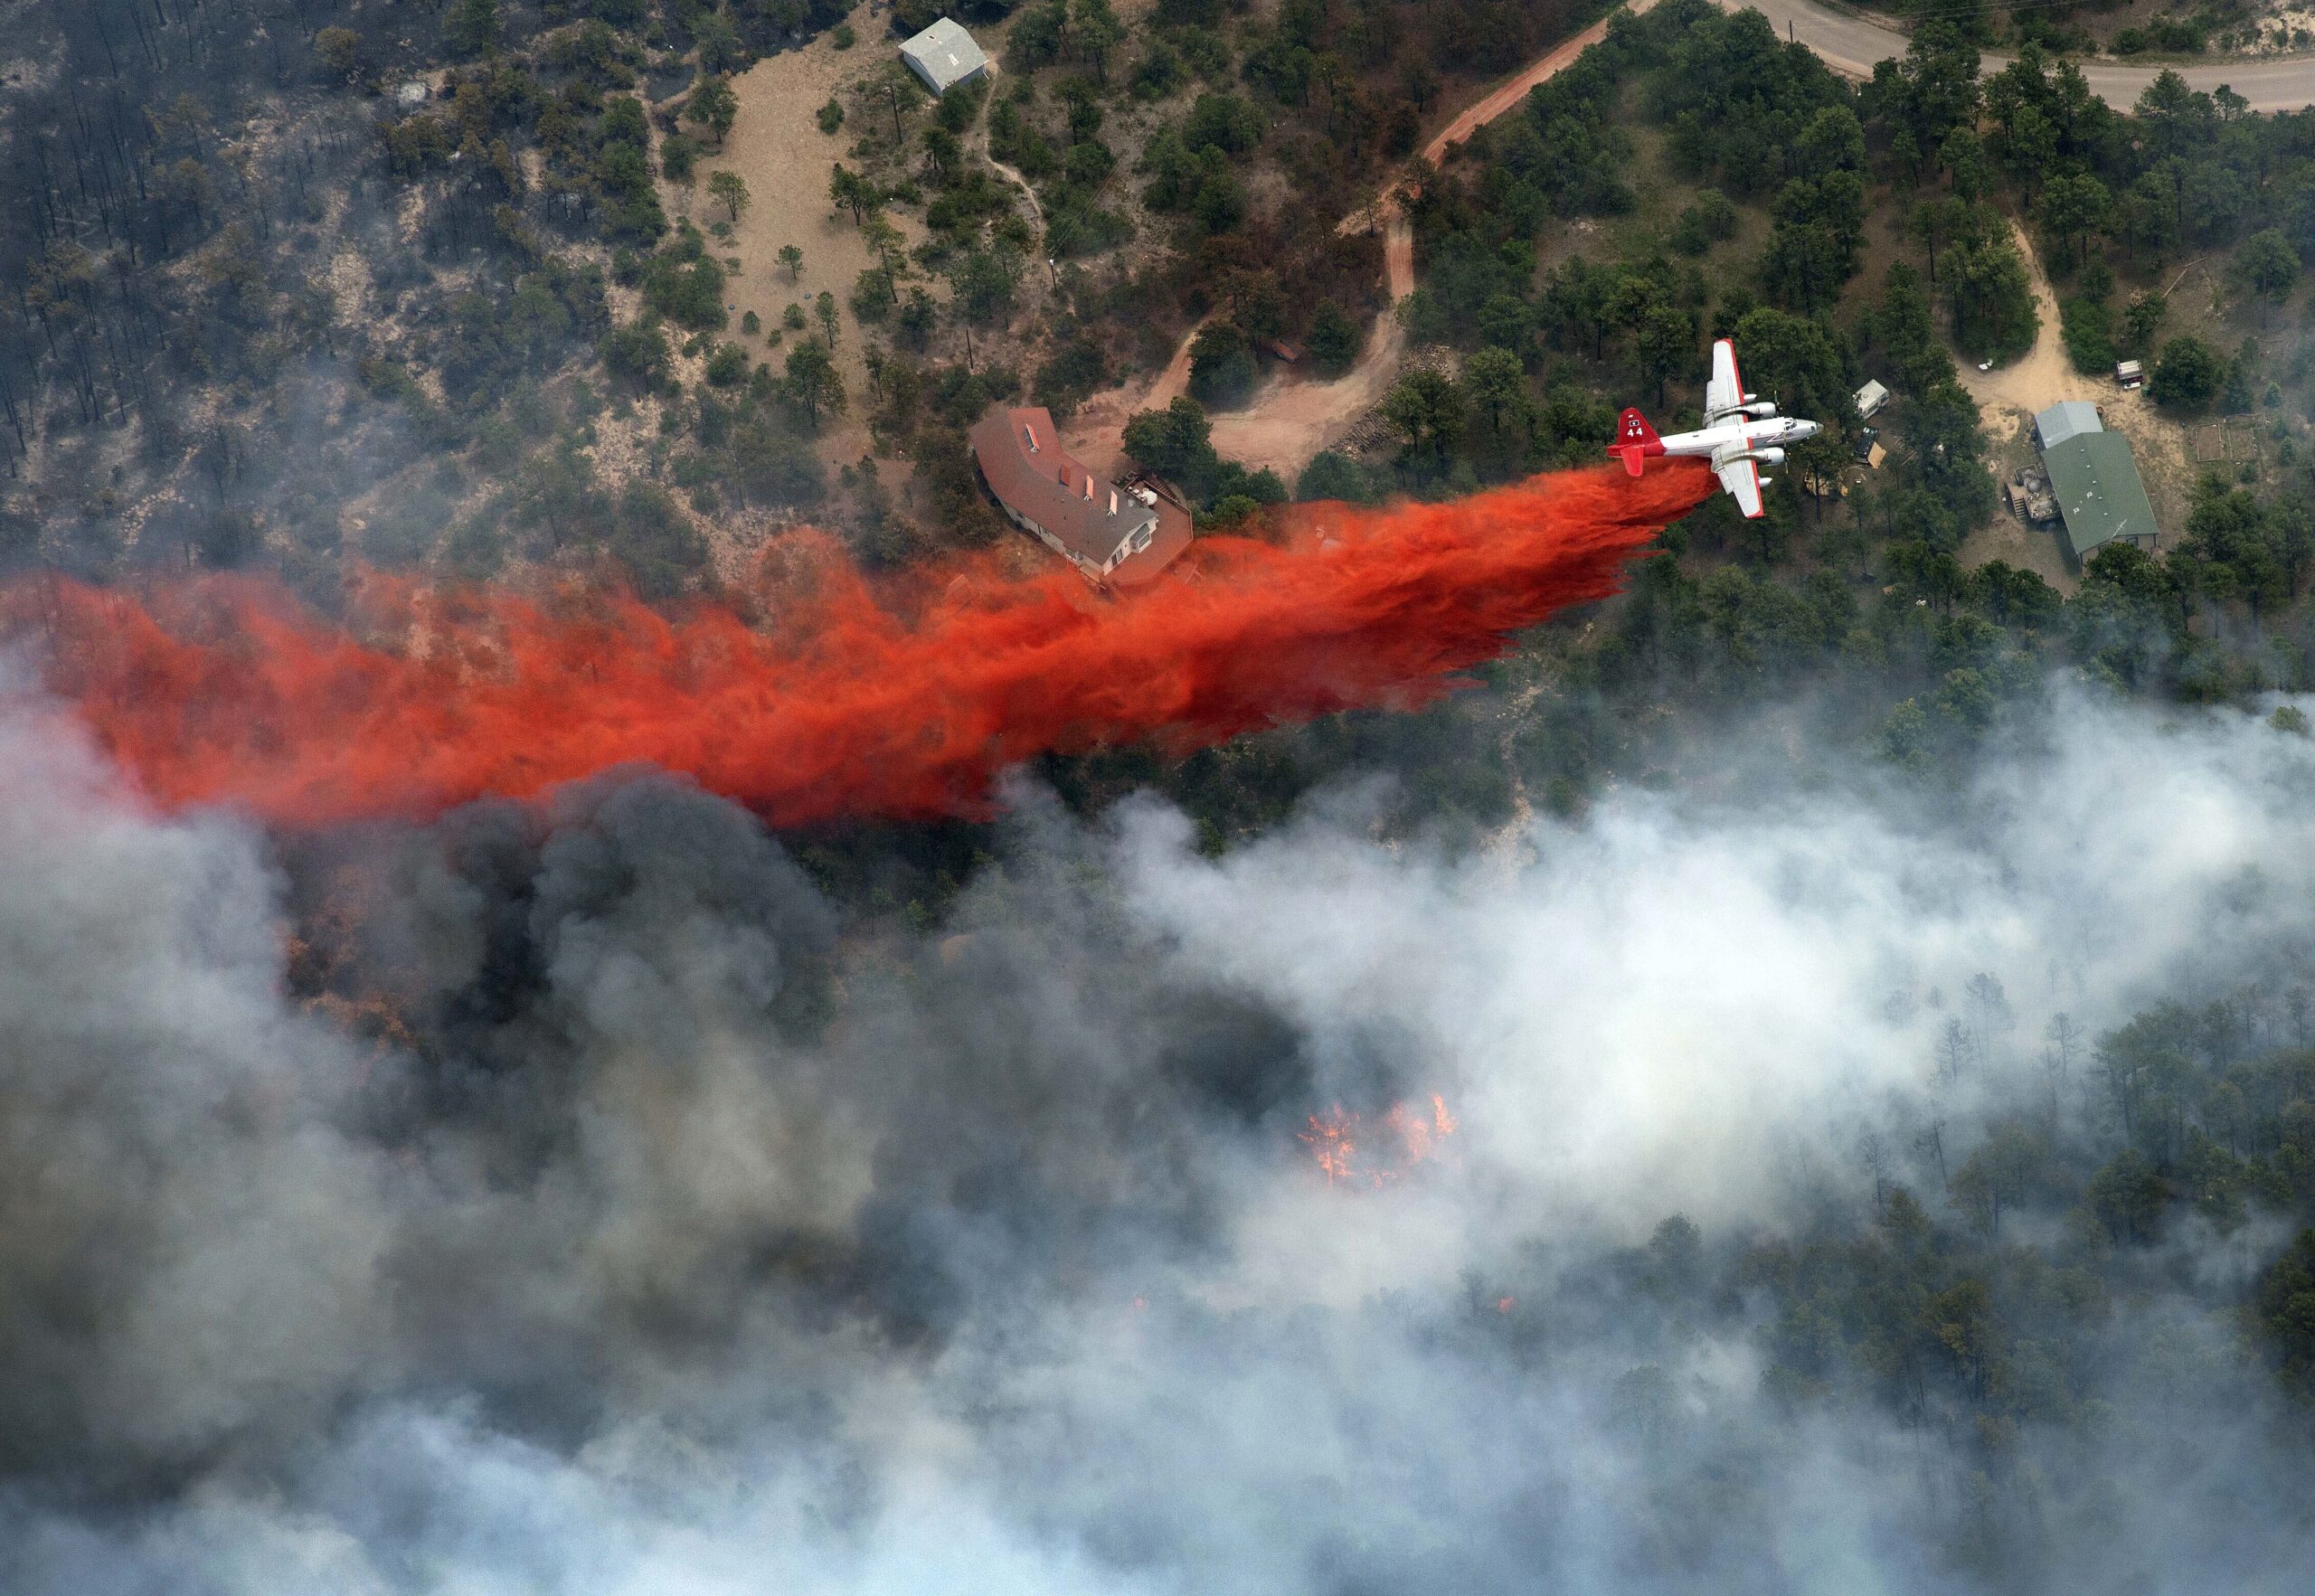 Judge Says Fire Retardant Polluting Streams but Allows Use to Continue